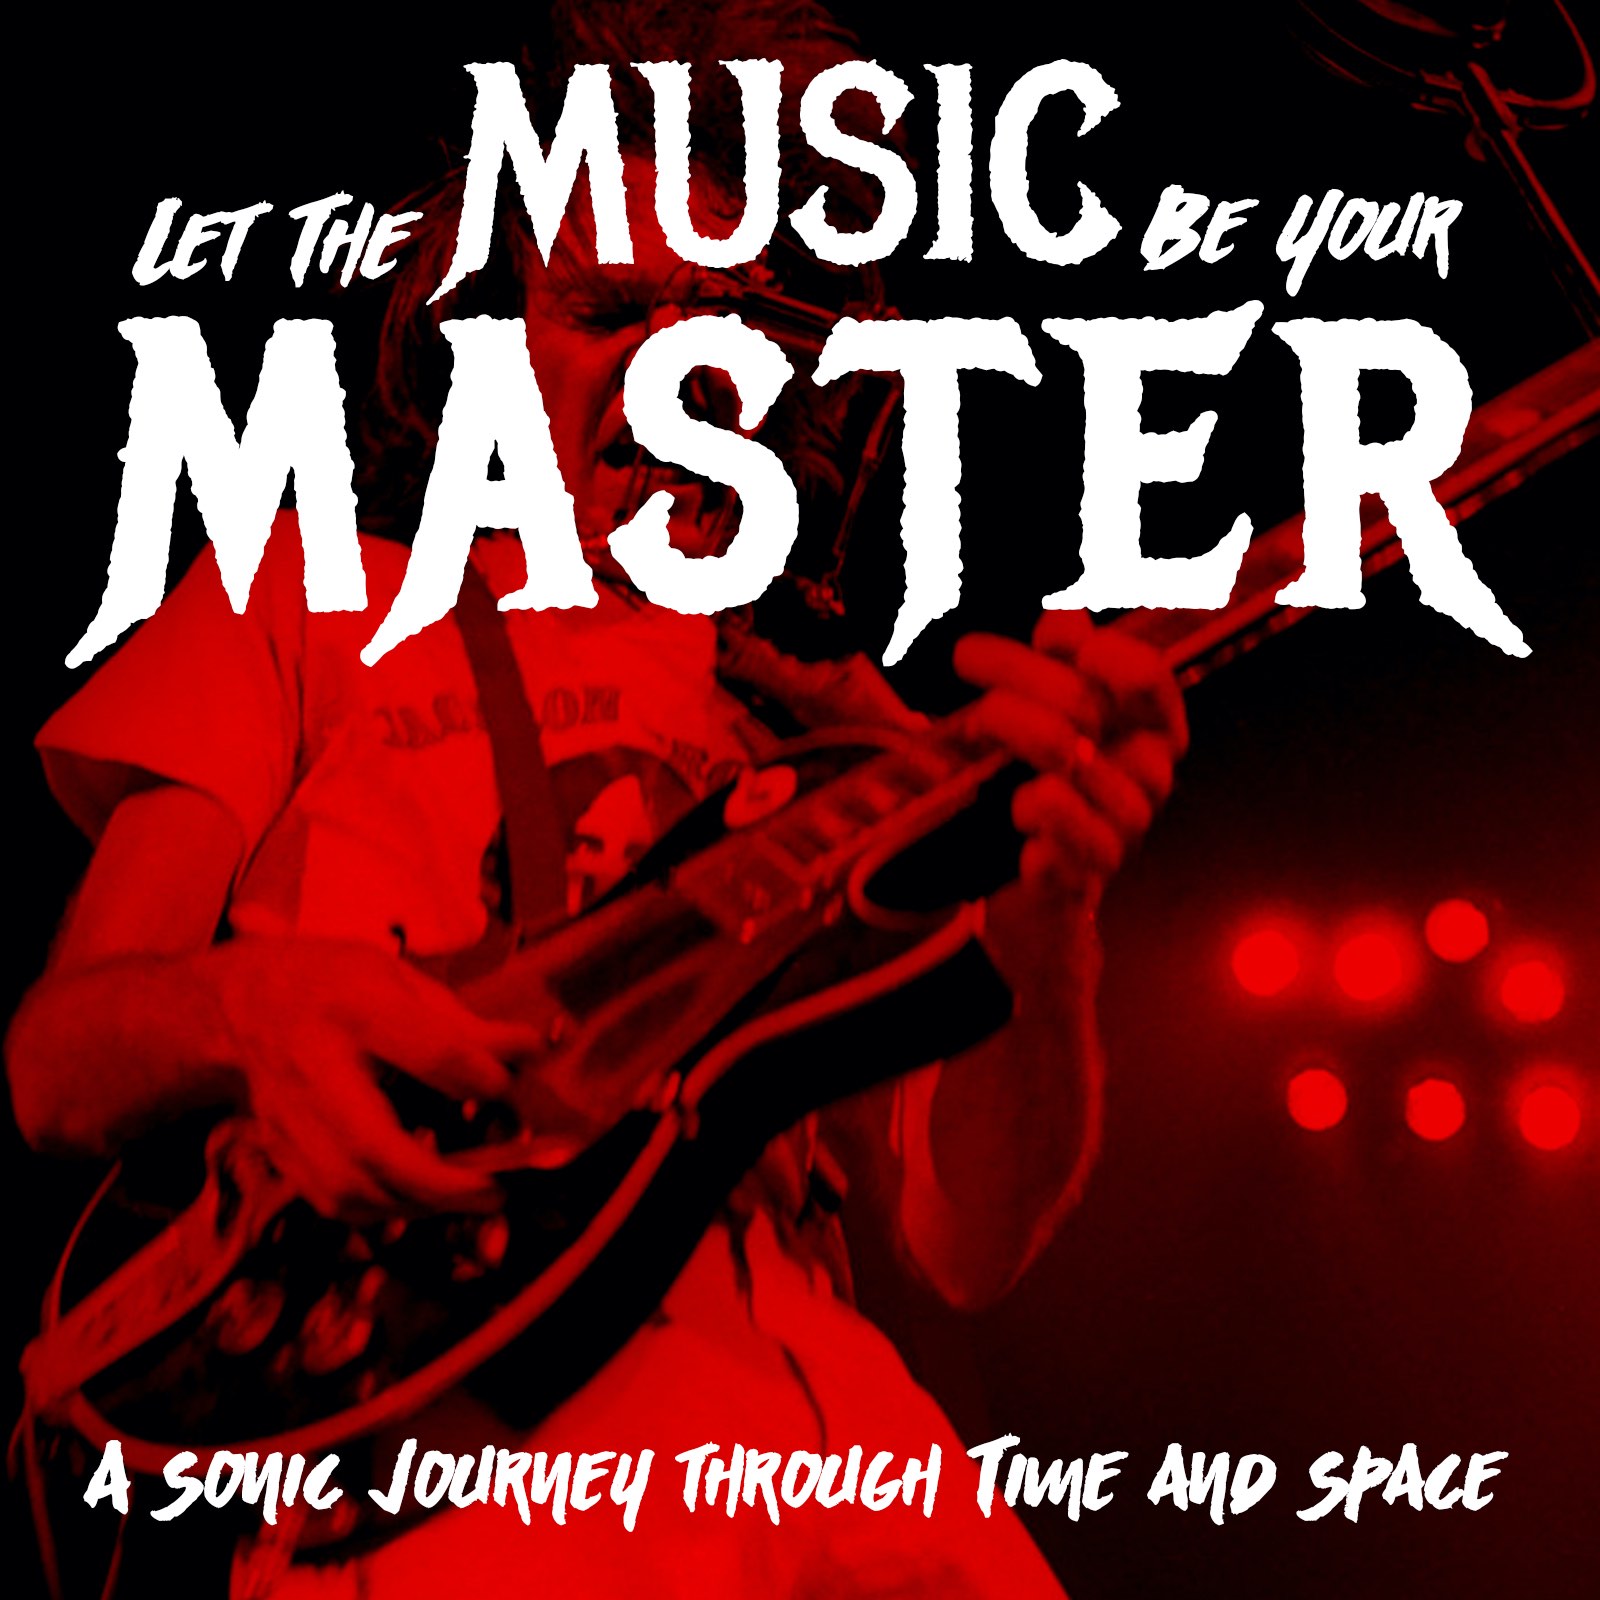 Let the Music Be Your Master